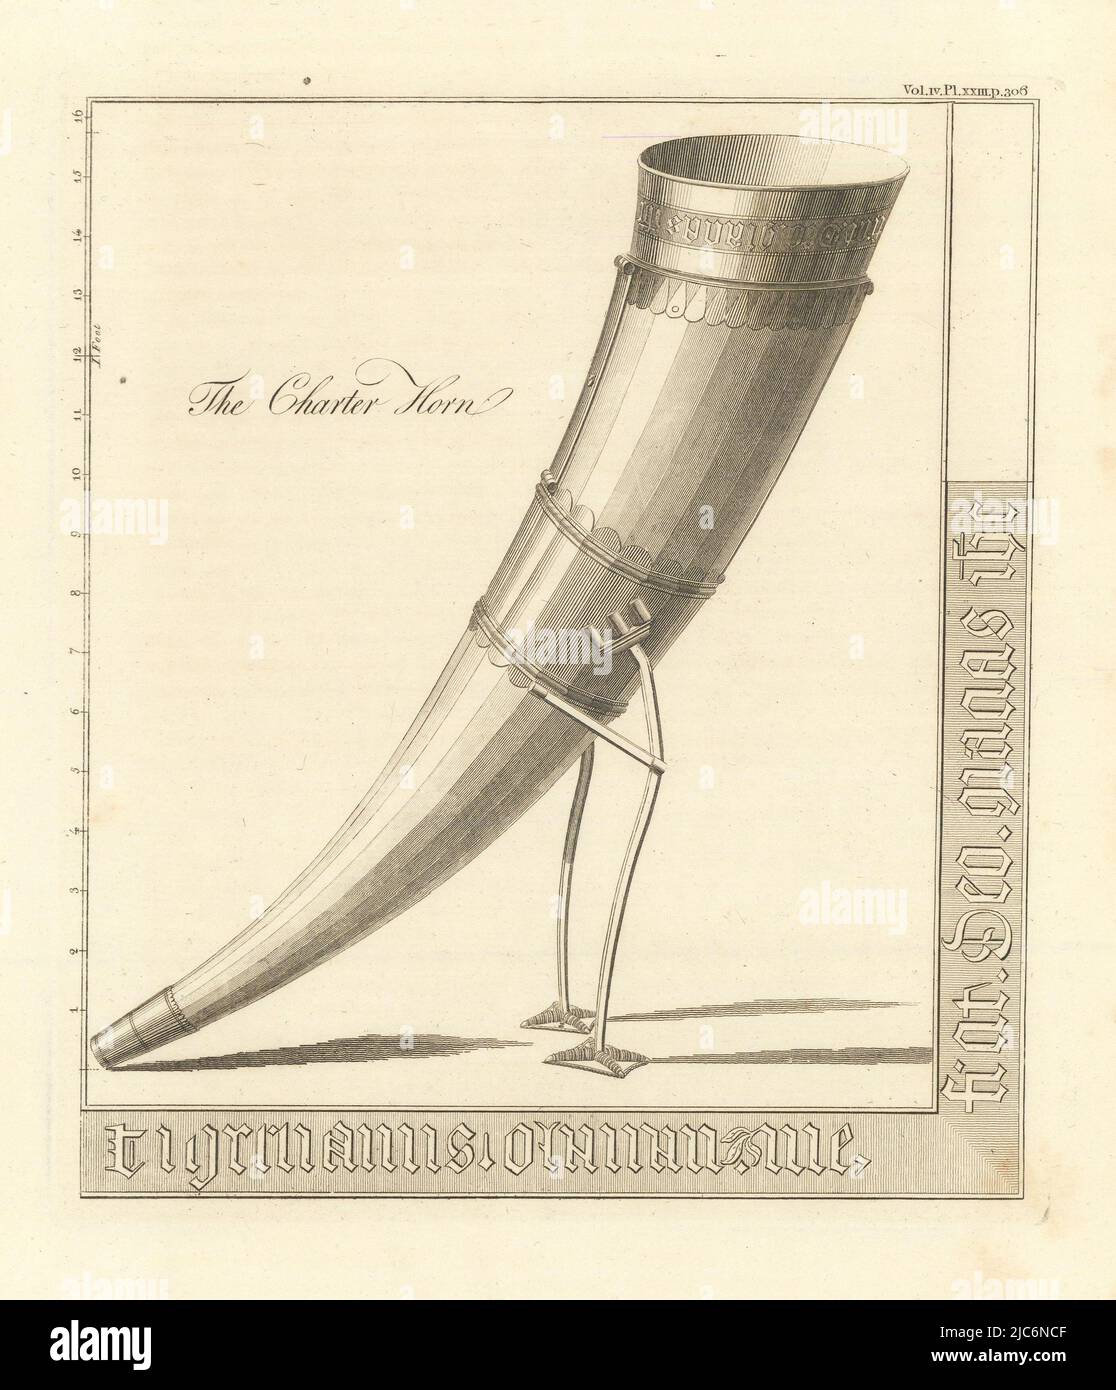 The Kavanagh Charter Horn. Ceremonial drinking horn 1806 old antique print Stock Photo